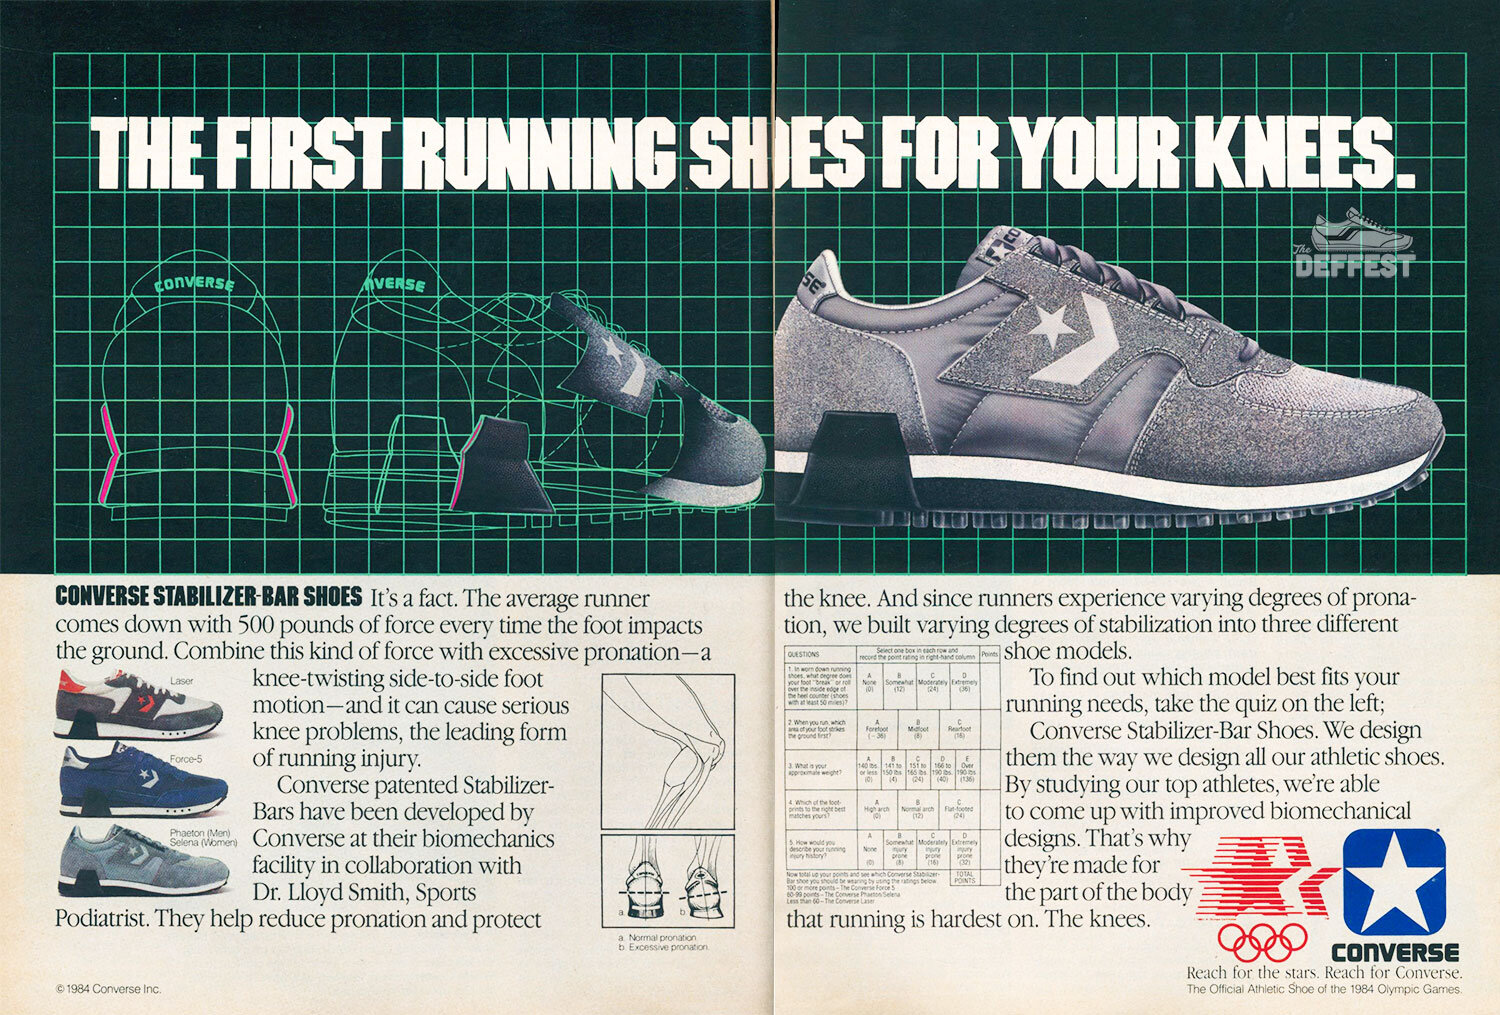 1984 olympics — The Deffest®. A vintage and retro sneaker blog. — Vintage  Ads